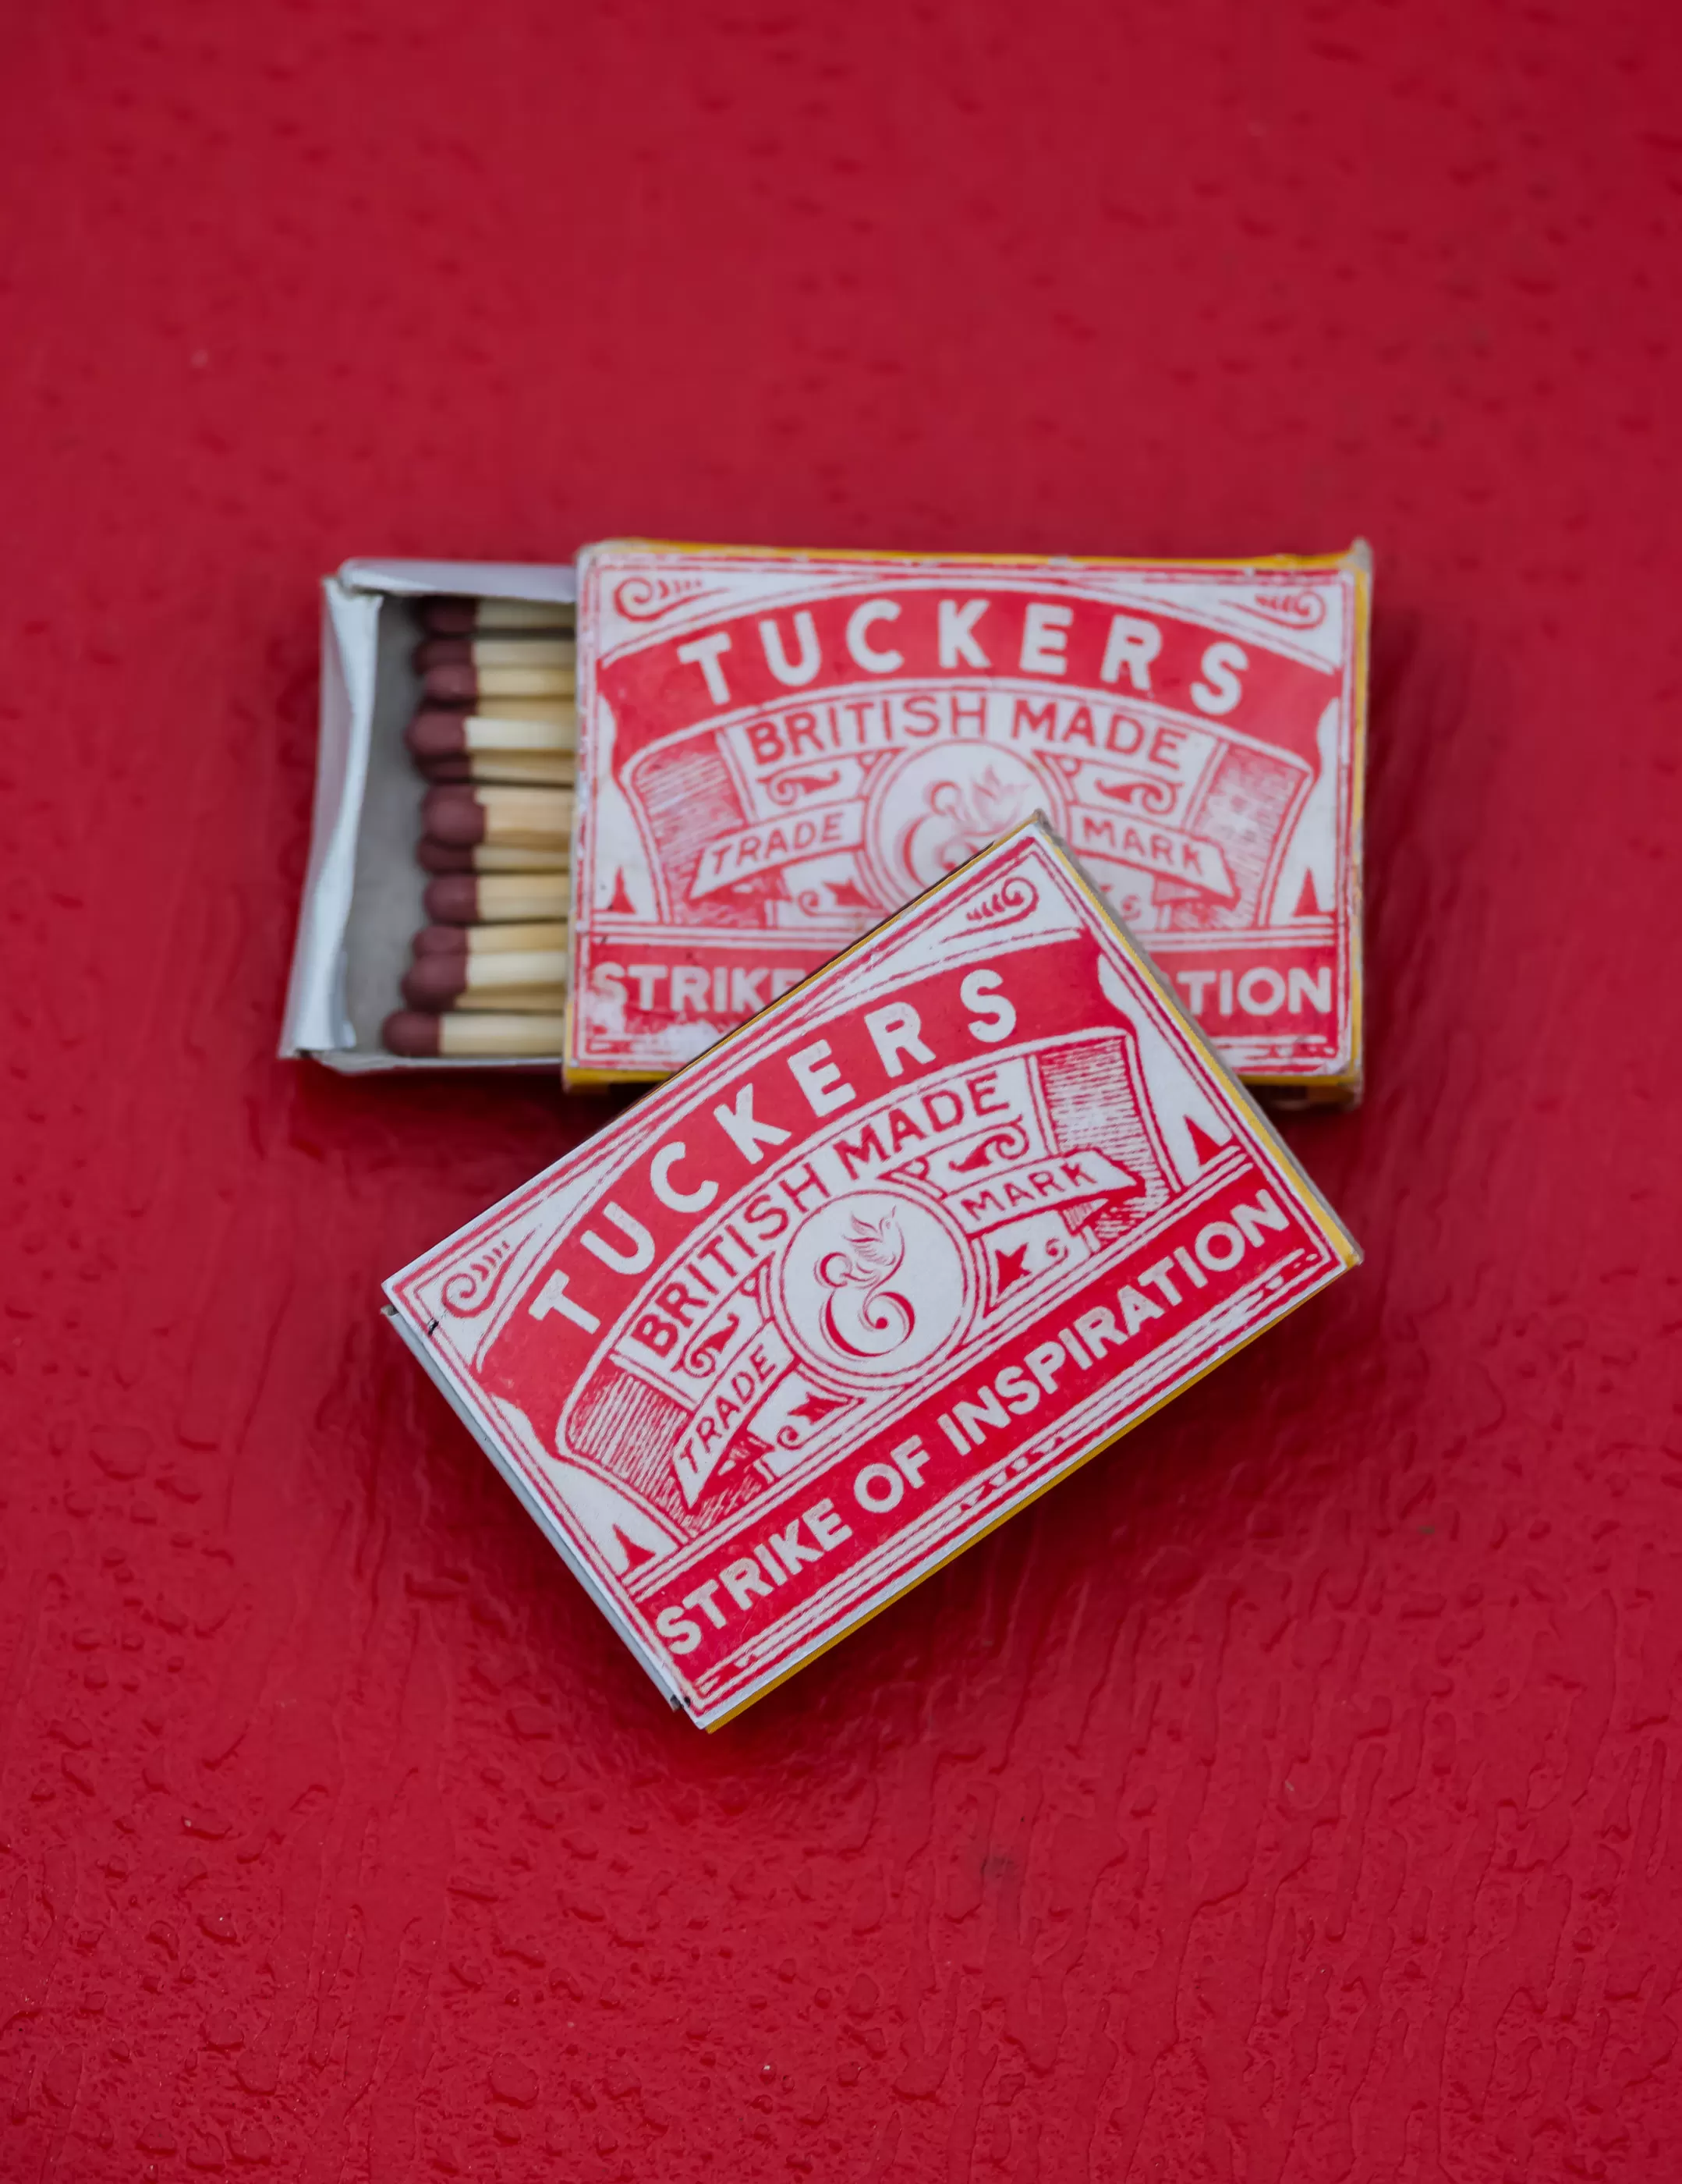 Two boxes of matches called Tuckers Strike of Inspiration on a red background